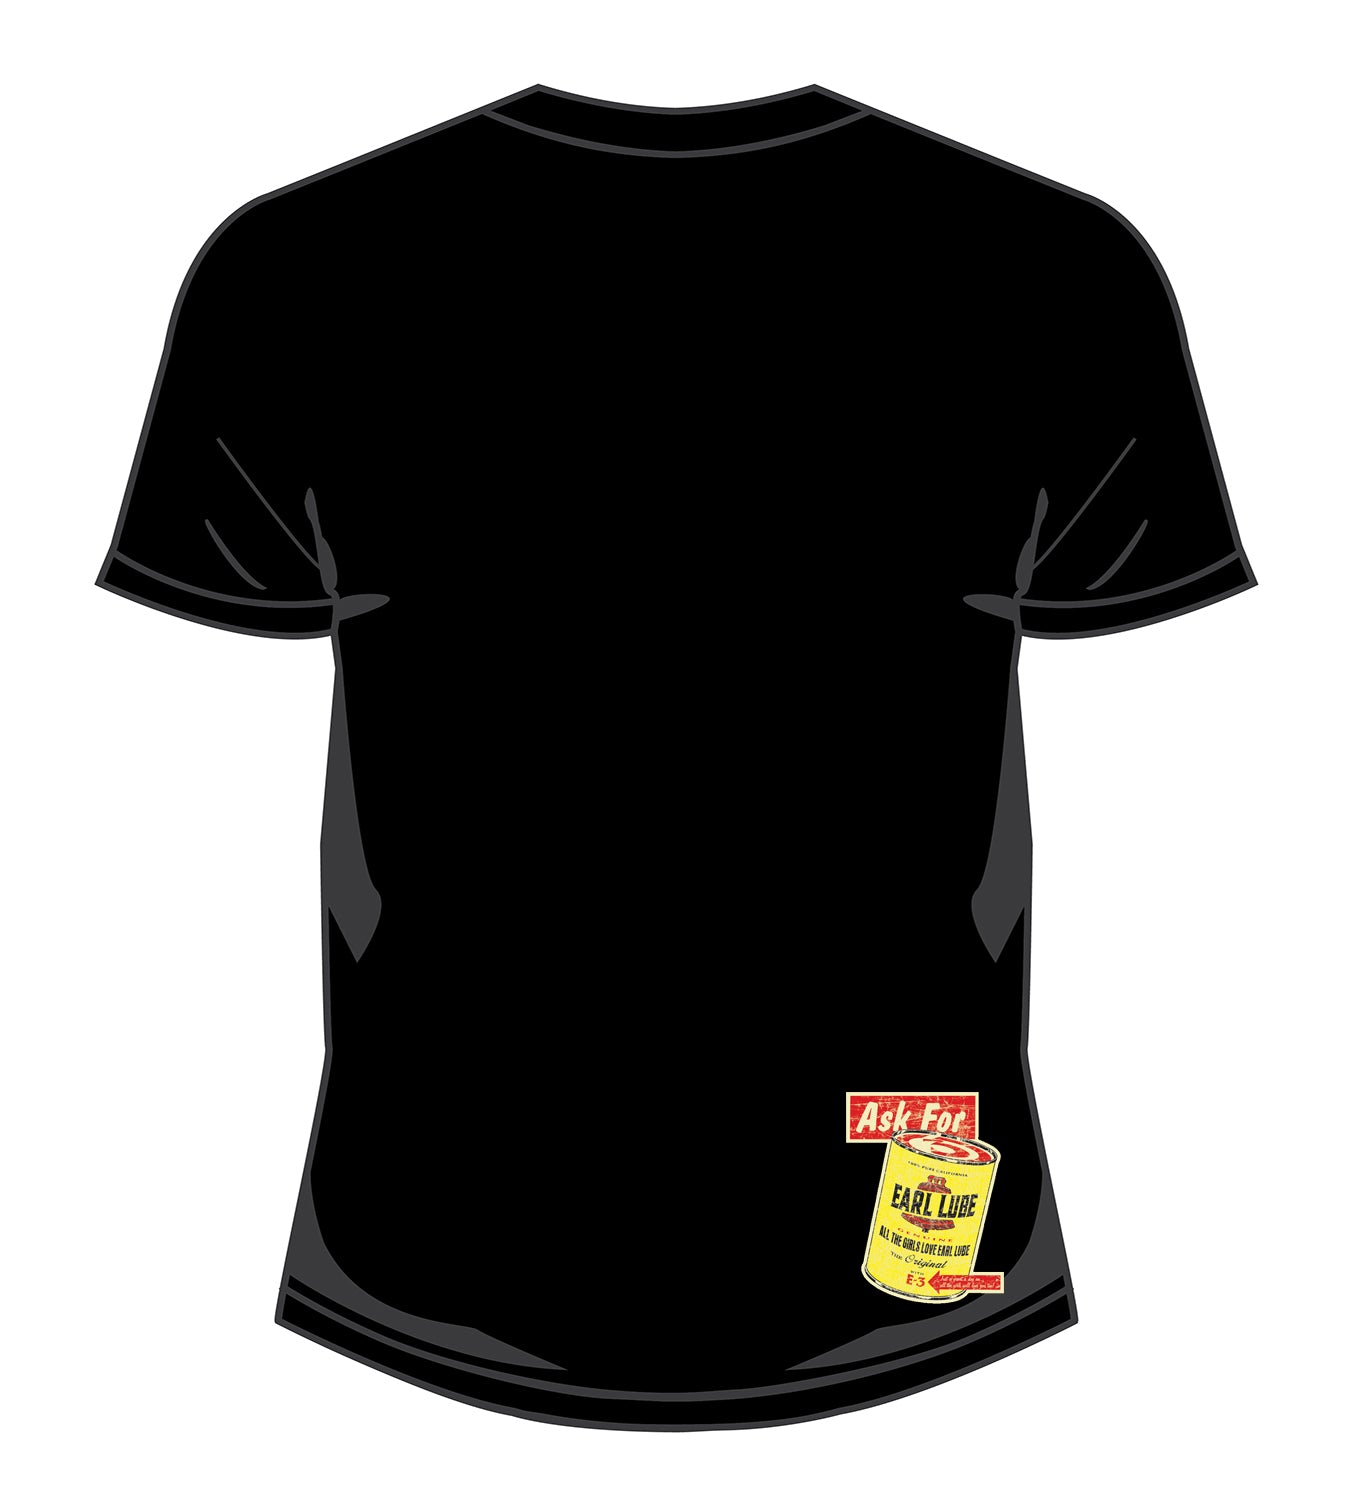 Earl Lube Can T-Shirt: This back design features a small print of the famous street art Earl Lube Can graphic at the bottom right.  "Just a Quart a Day and All The Girls Will Love You Too!"  This black t-shirt features 100% soft-spun 6.1 oz. cotton for a super comfy feel with plastisol ink screen printed graphics.